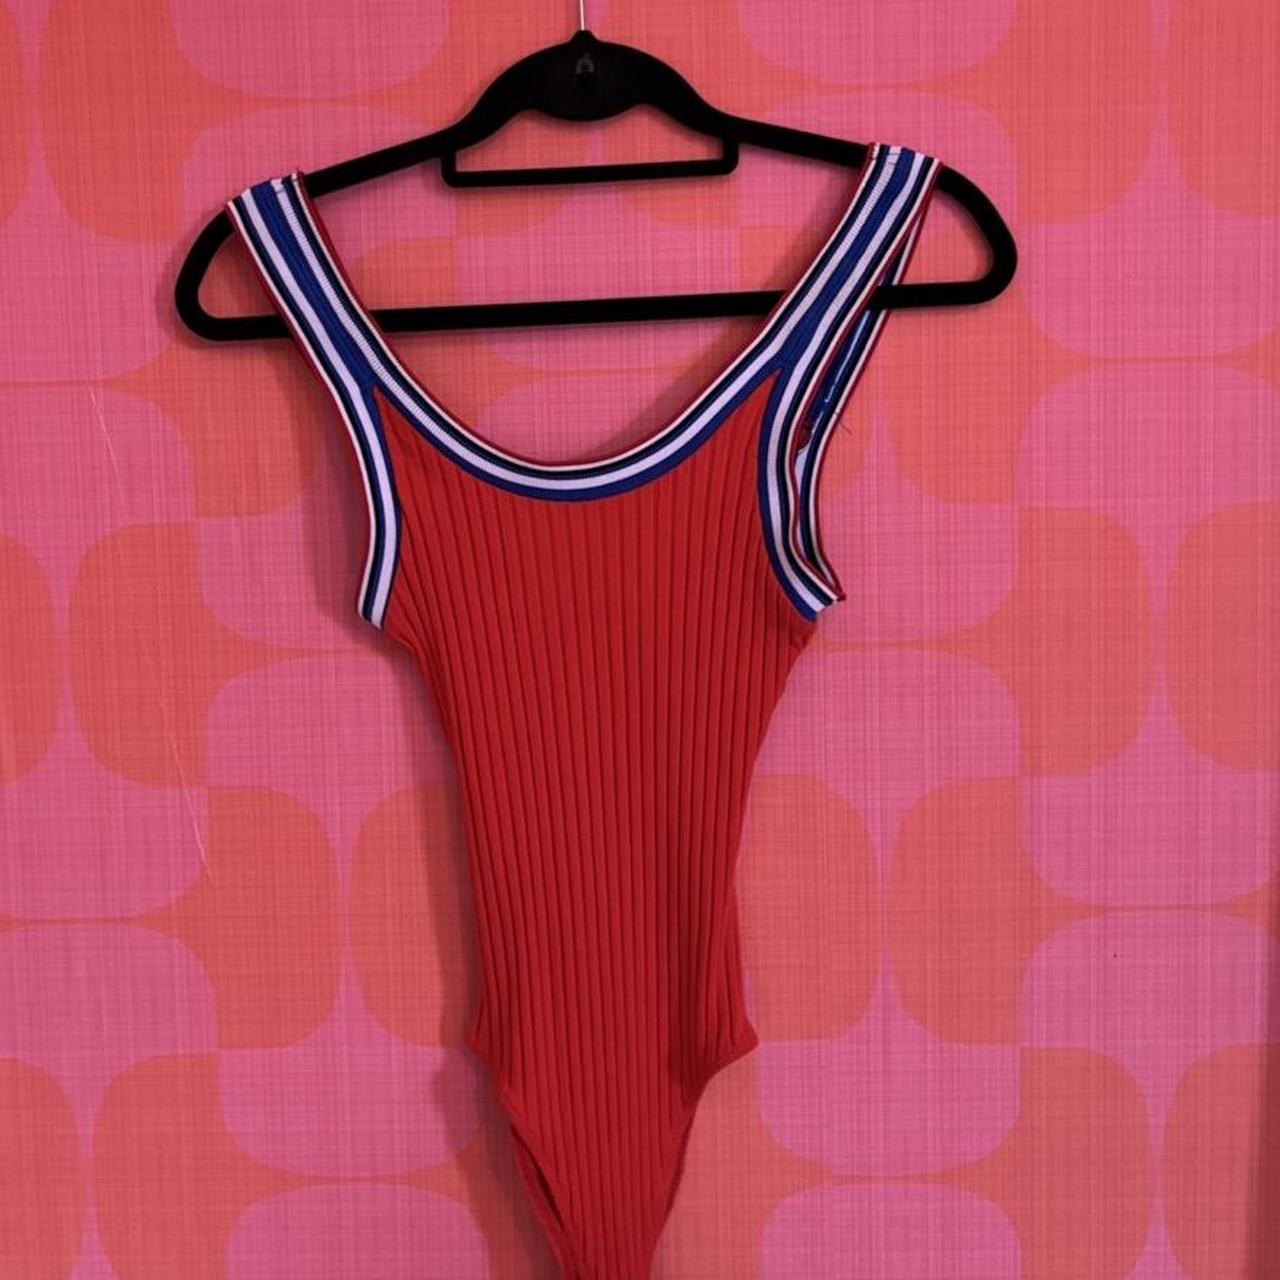 Bershka sporty bodysuit in size small. Red with blue - Depop